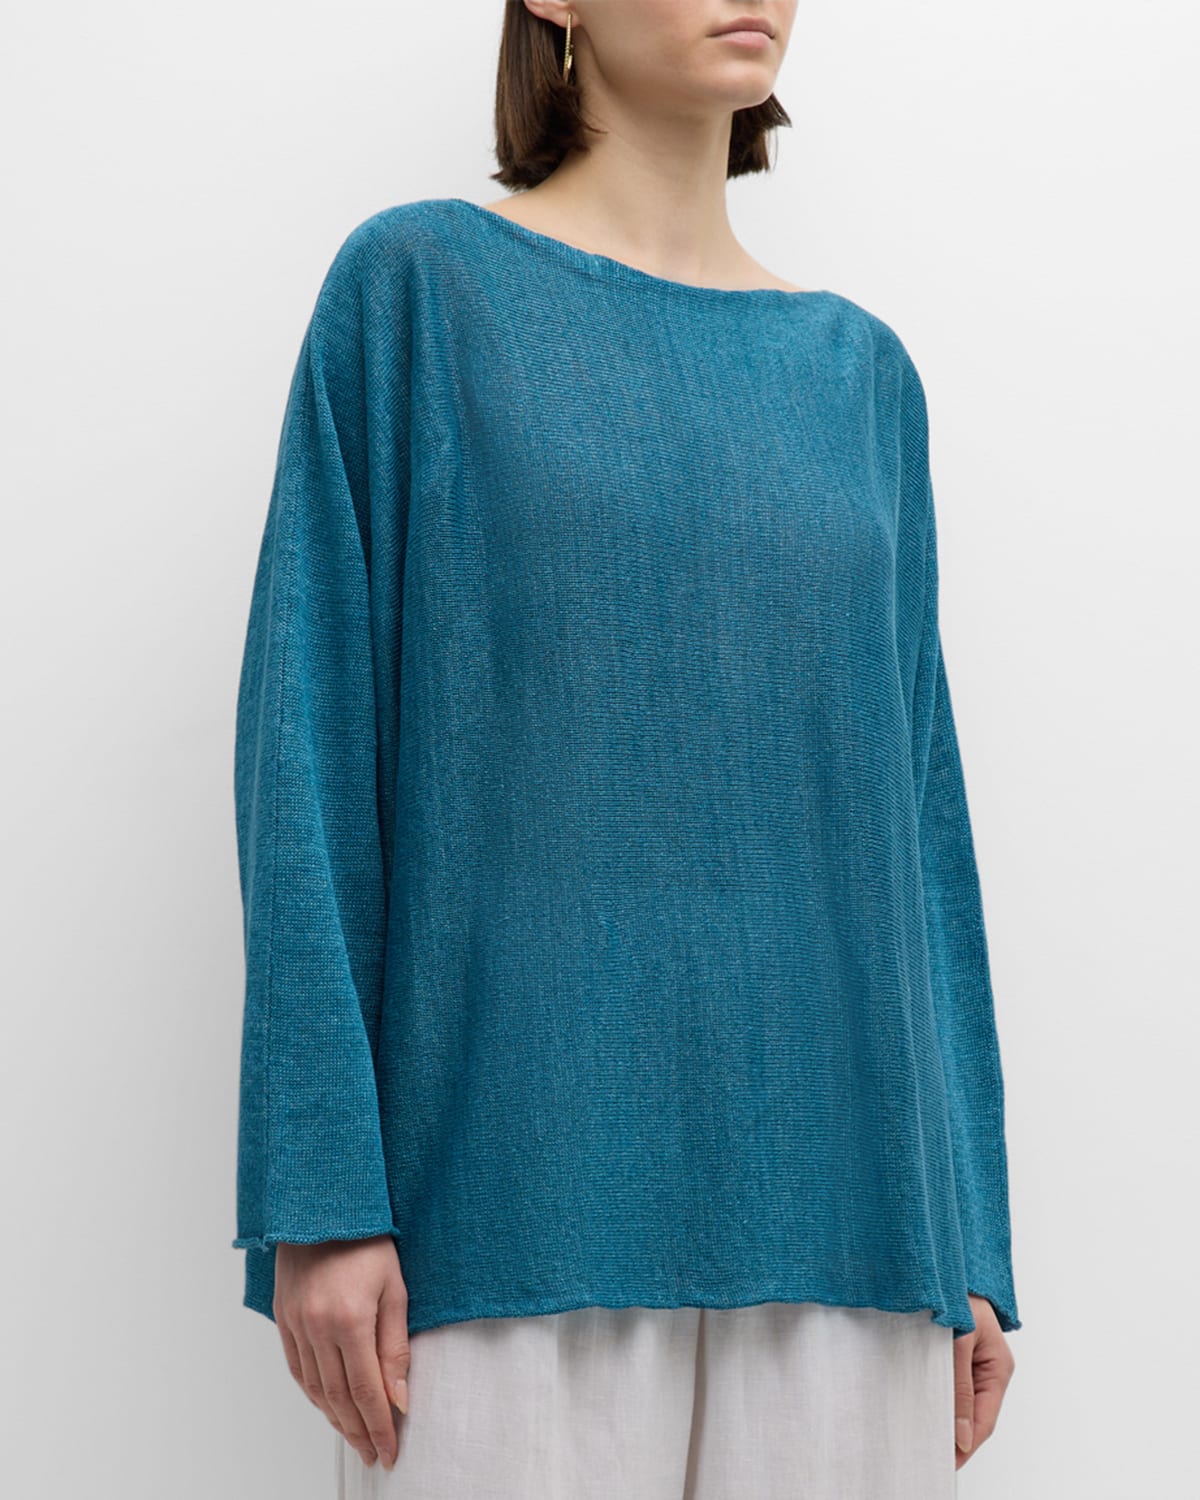 Sideways Knitted Sweater (Mid-Length)